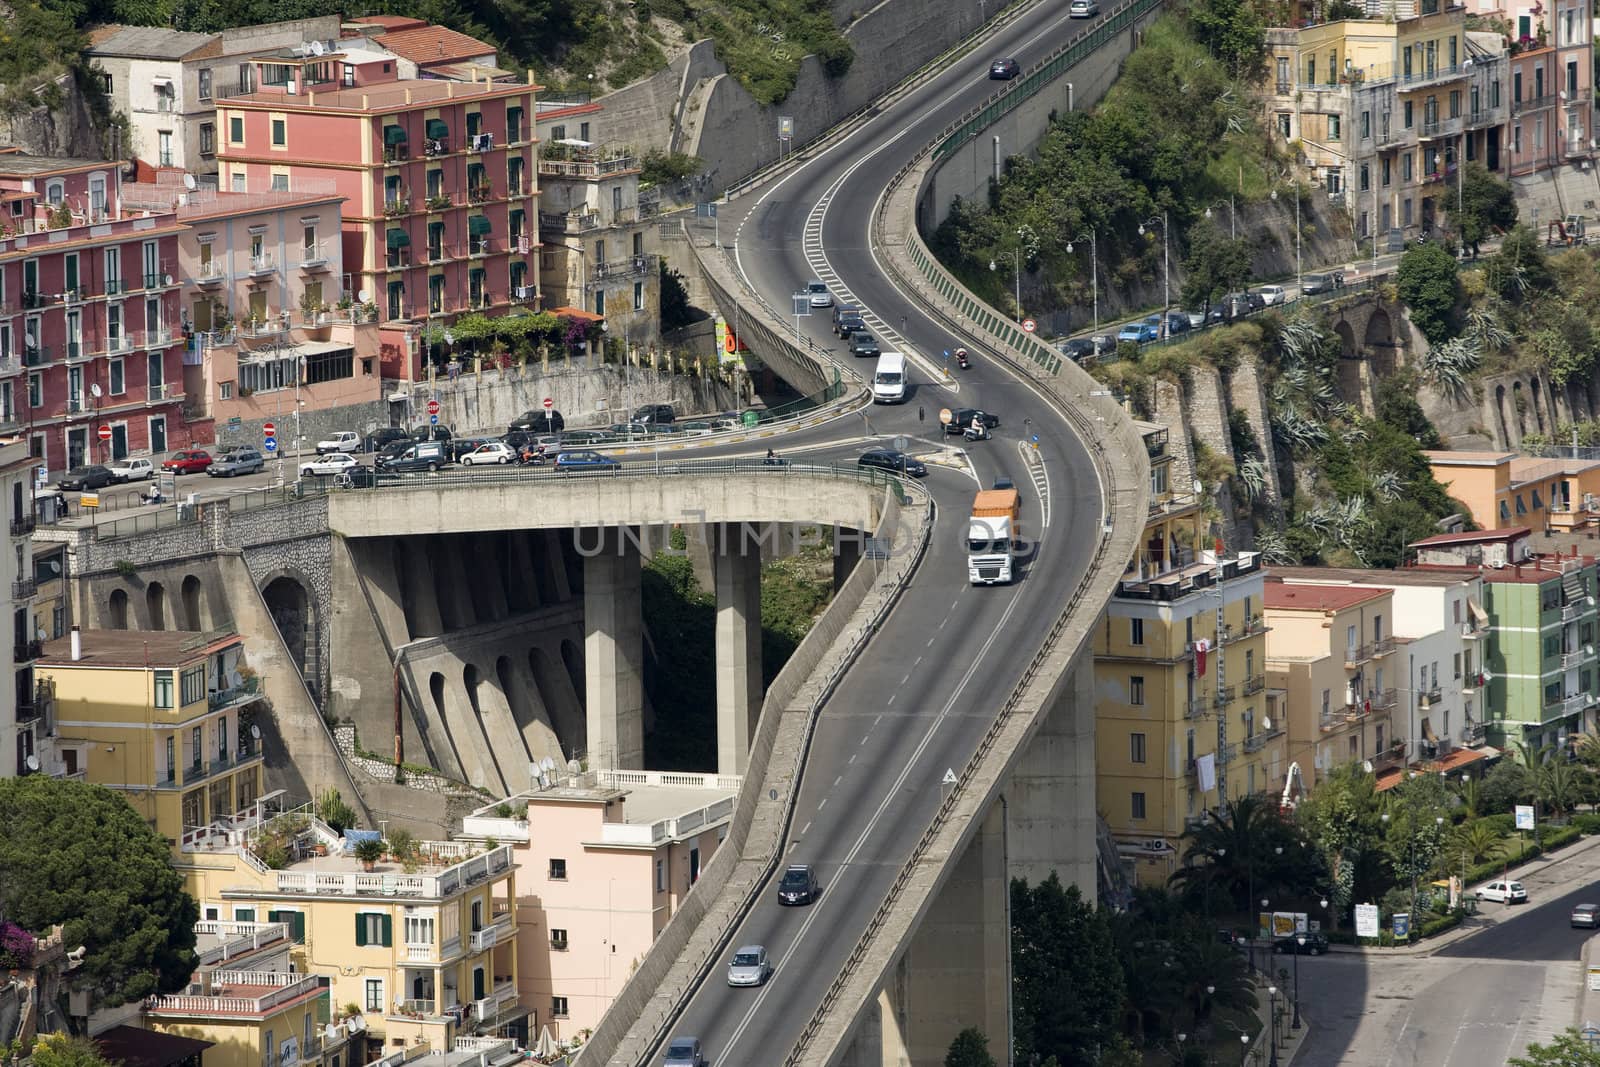 Bird's eye view of multi-level flyover in mountain city somewhere in Italy